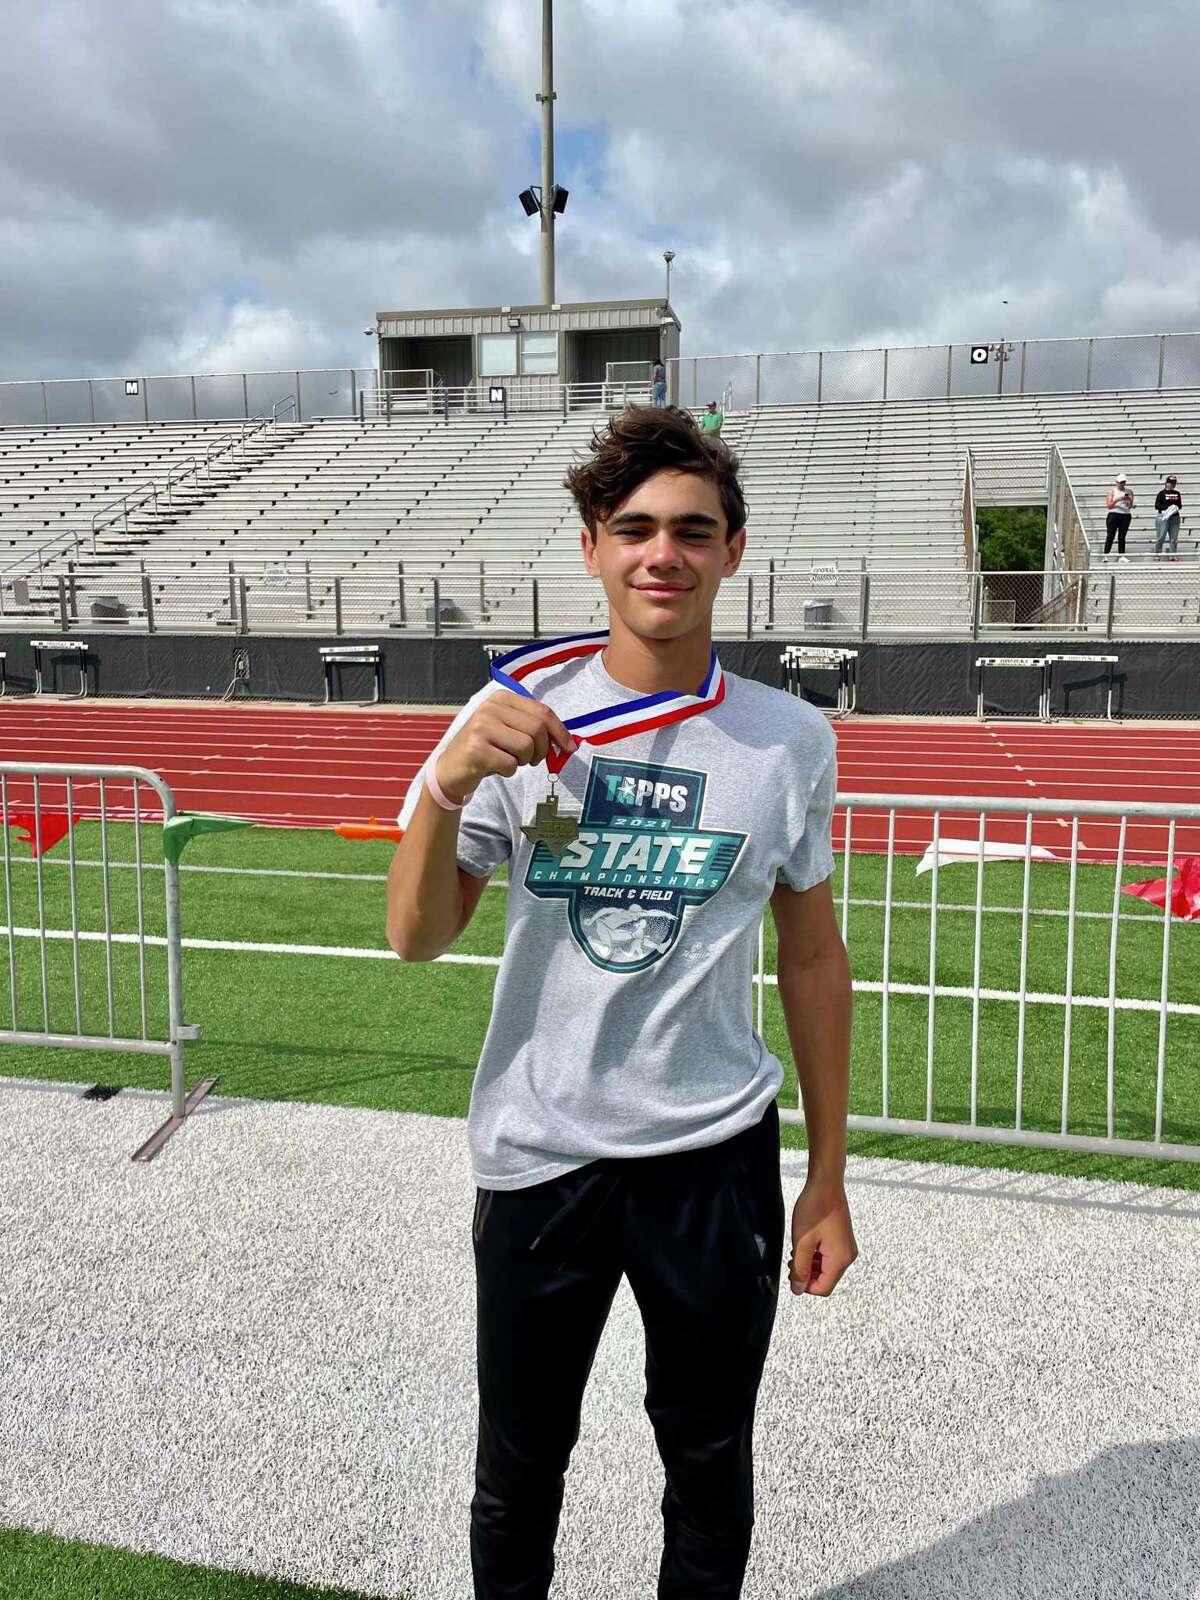 St. Augustune’s Efram Melendez won the pole vault at the district meet after clearing 15-0.